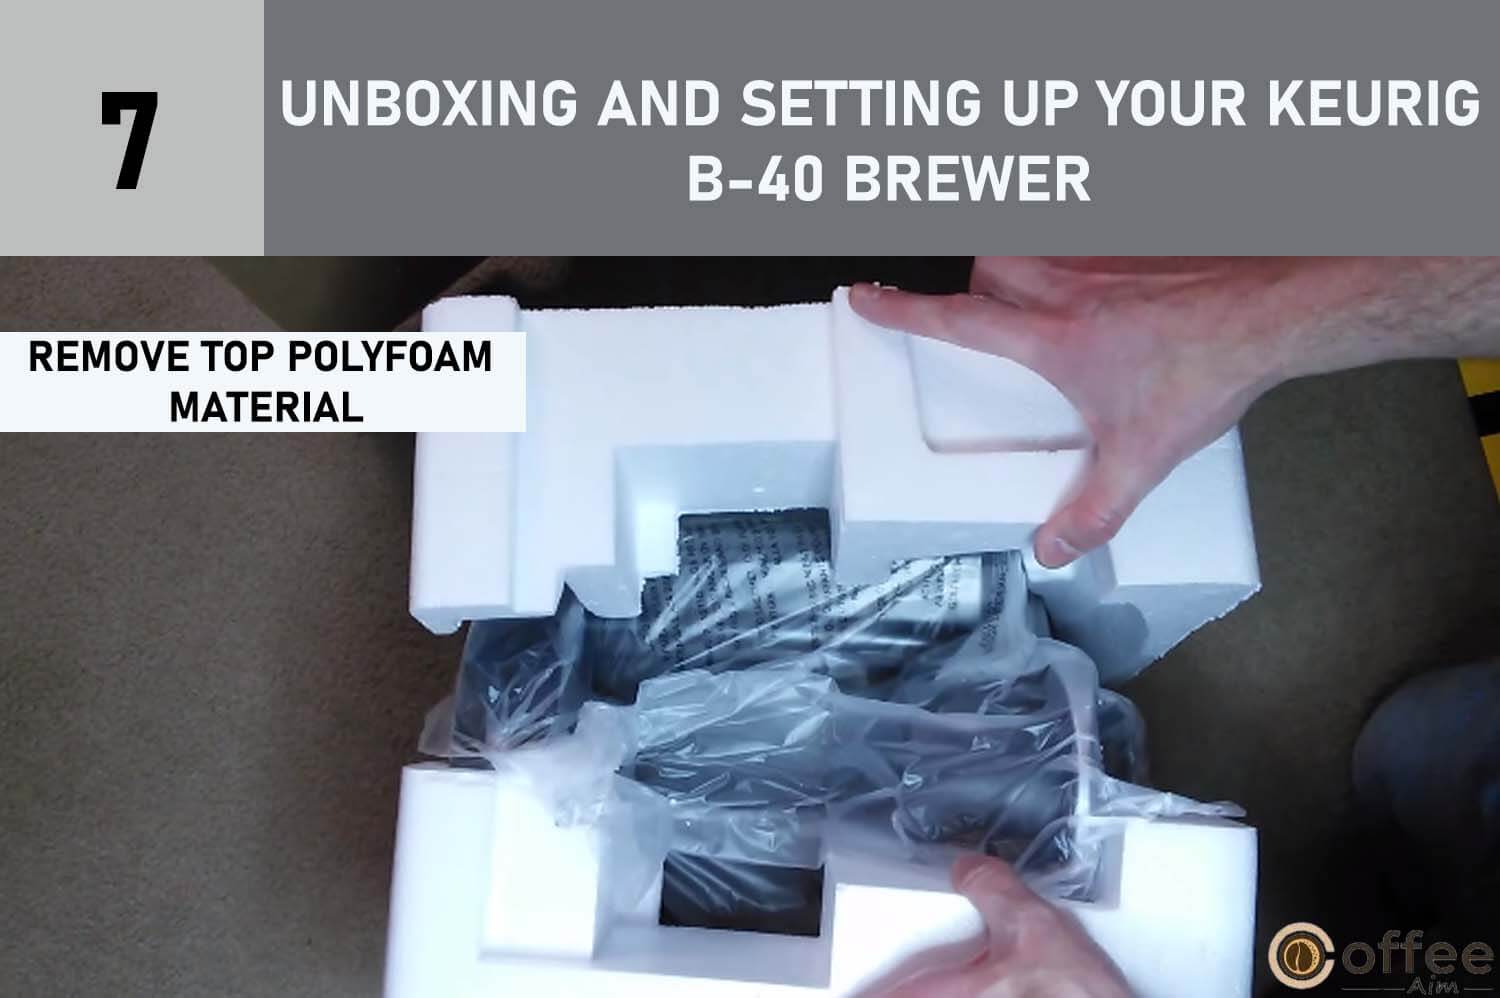 The image illustrates the process of carefully removing the top protective material from the Keurig B-40 Brewer. This step is a crucial part of the unboxing and setup process, ensuring that your brewer is ready for use. As you embark on the journey of setting up your Keurig B-40 Brewer, this step signifies the initial stages of preparing your machine to deliver exceptional brewing experiences. Follow along with our comprehensive guide on "How to Use the Keurig B-40